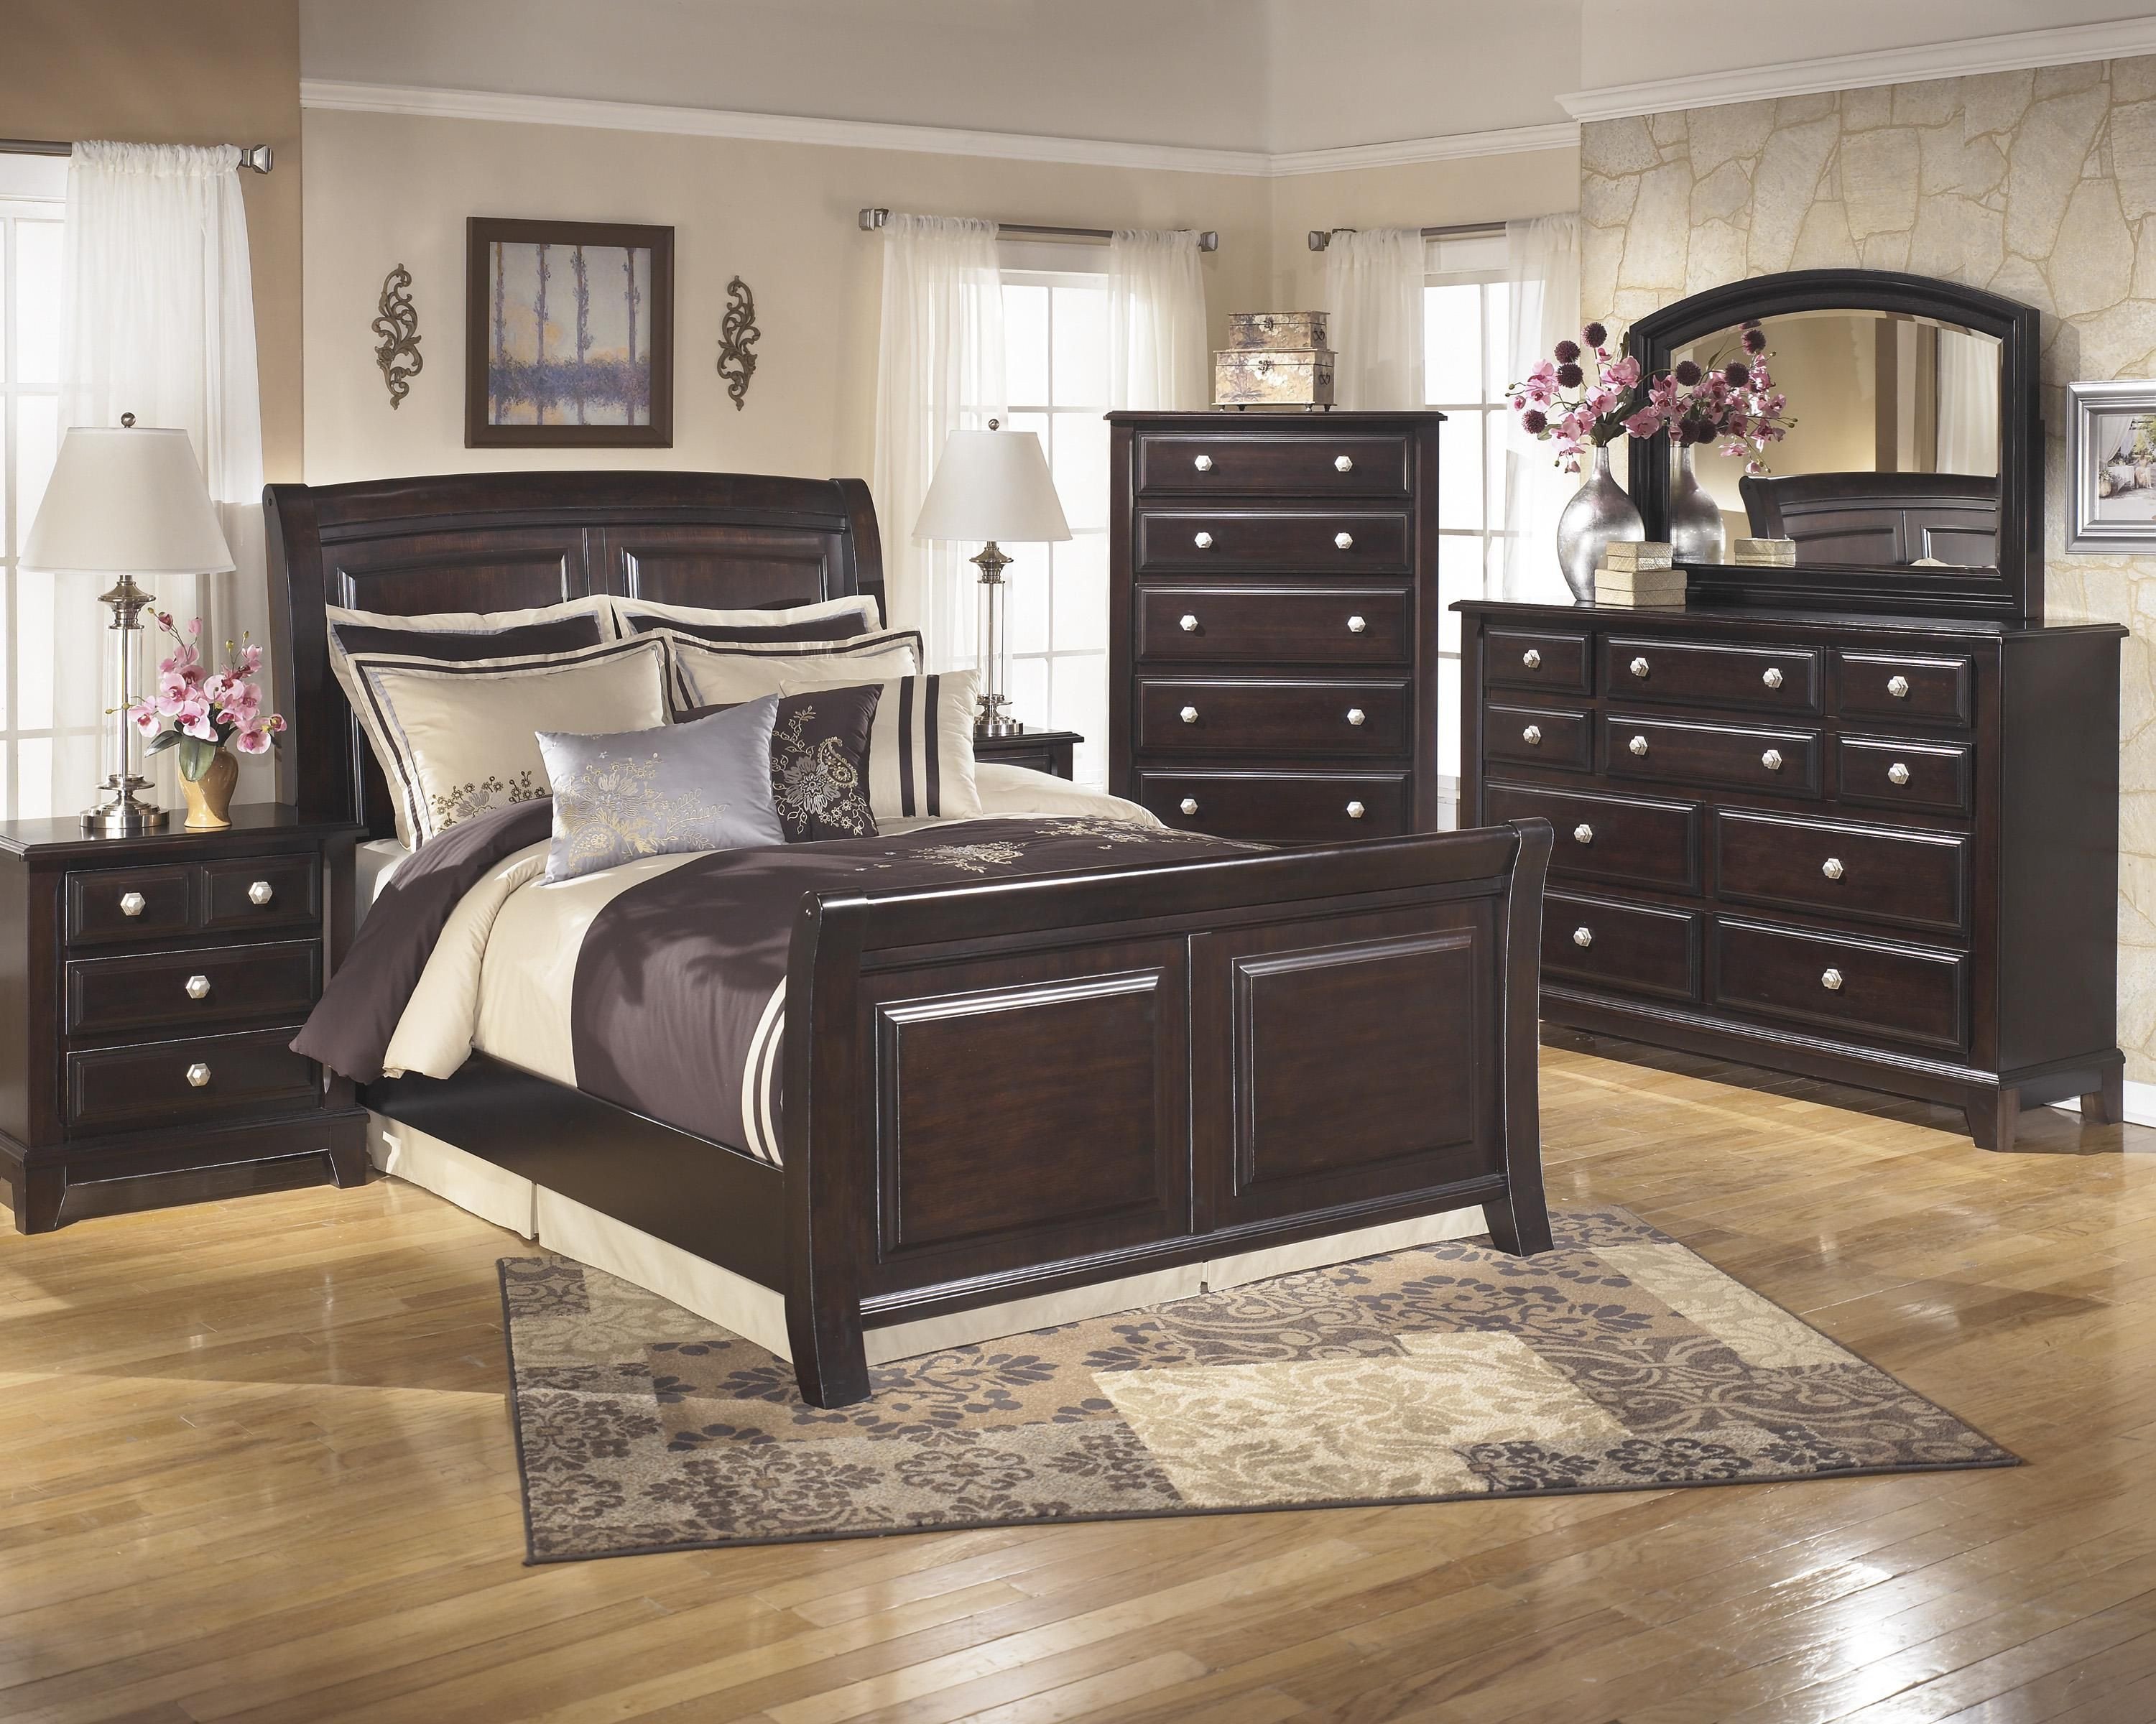 Used King Size Bedroom Set New Ridgley King Bedroom Group by Signature Design by ashley